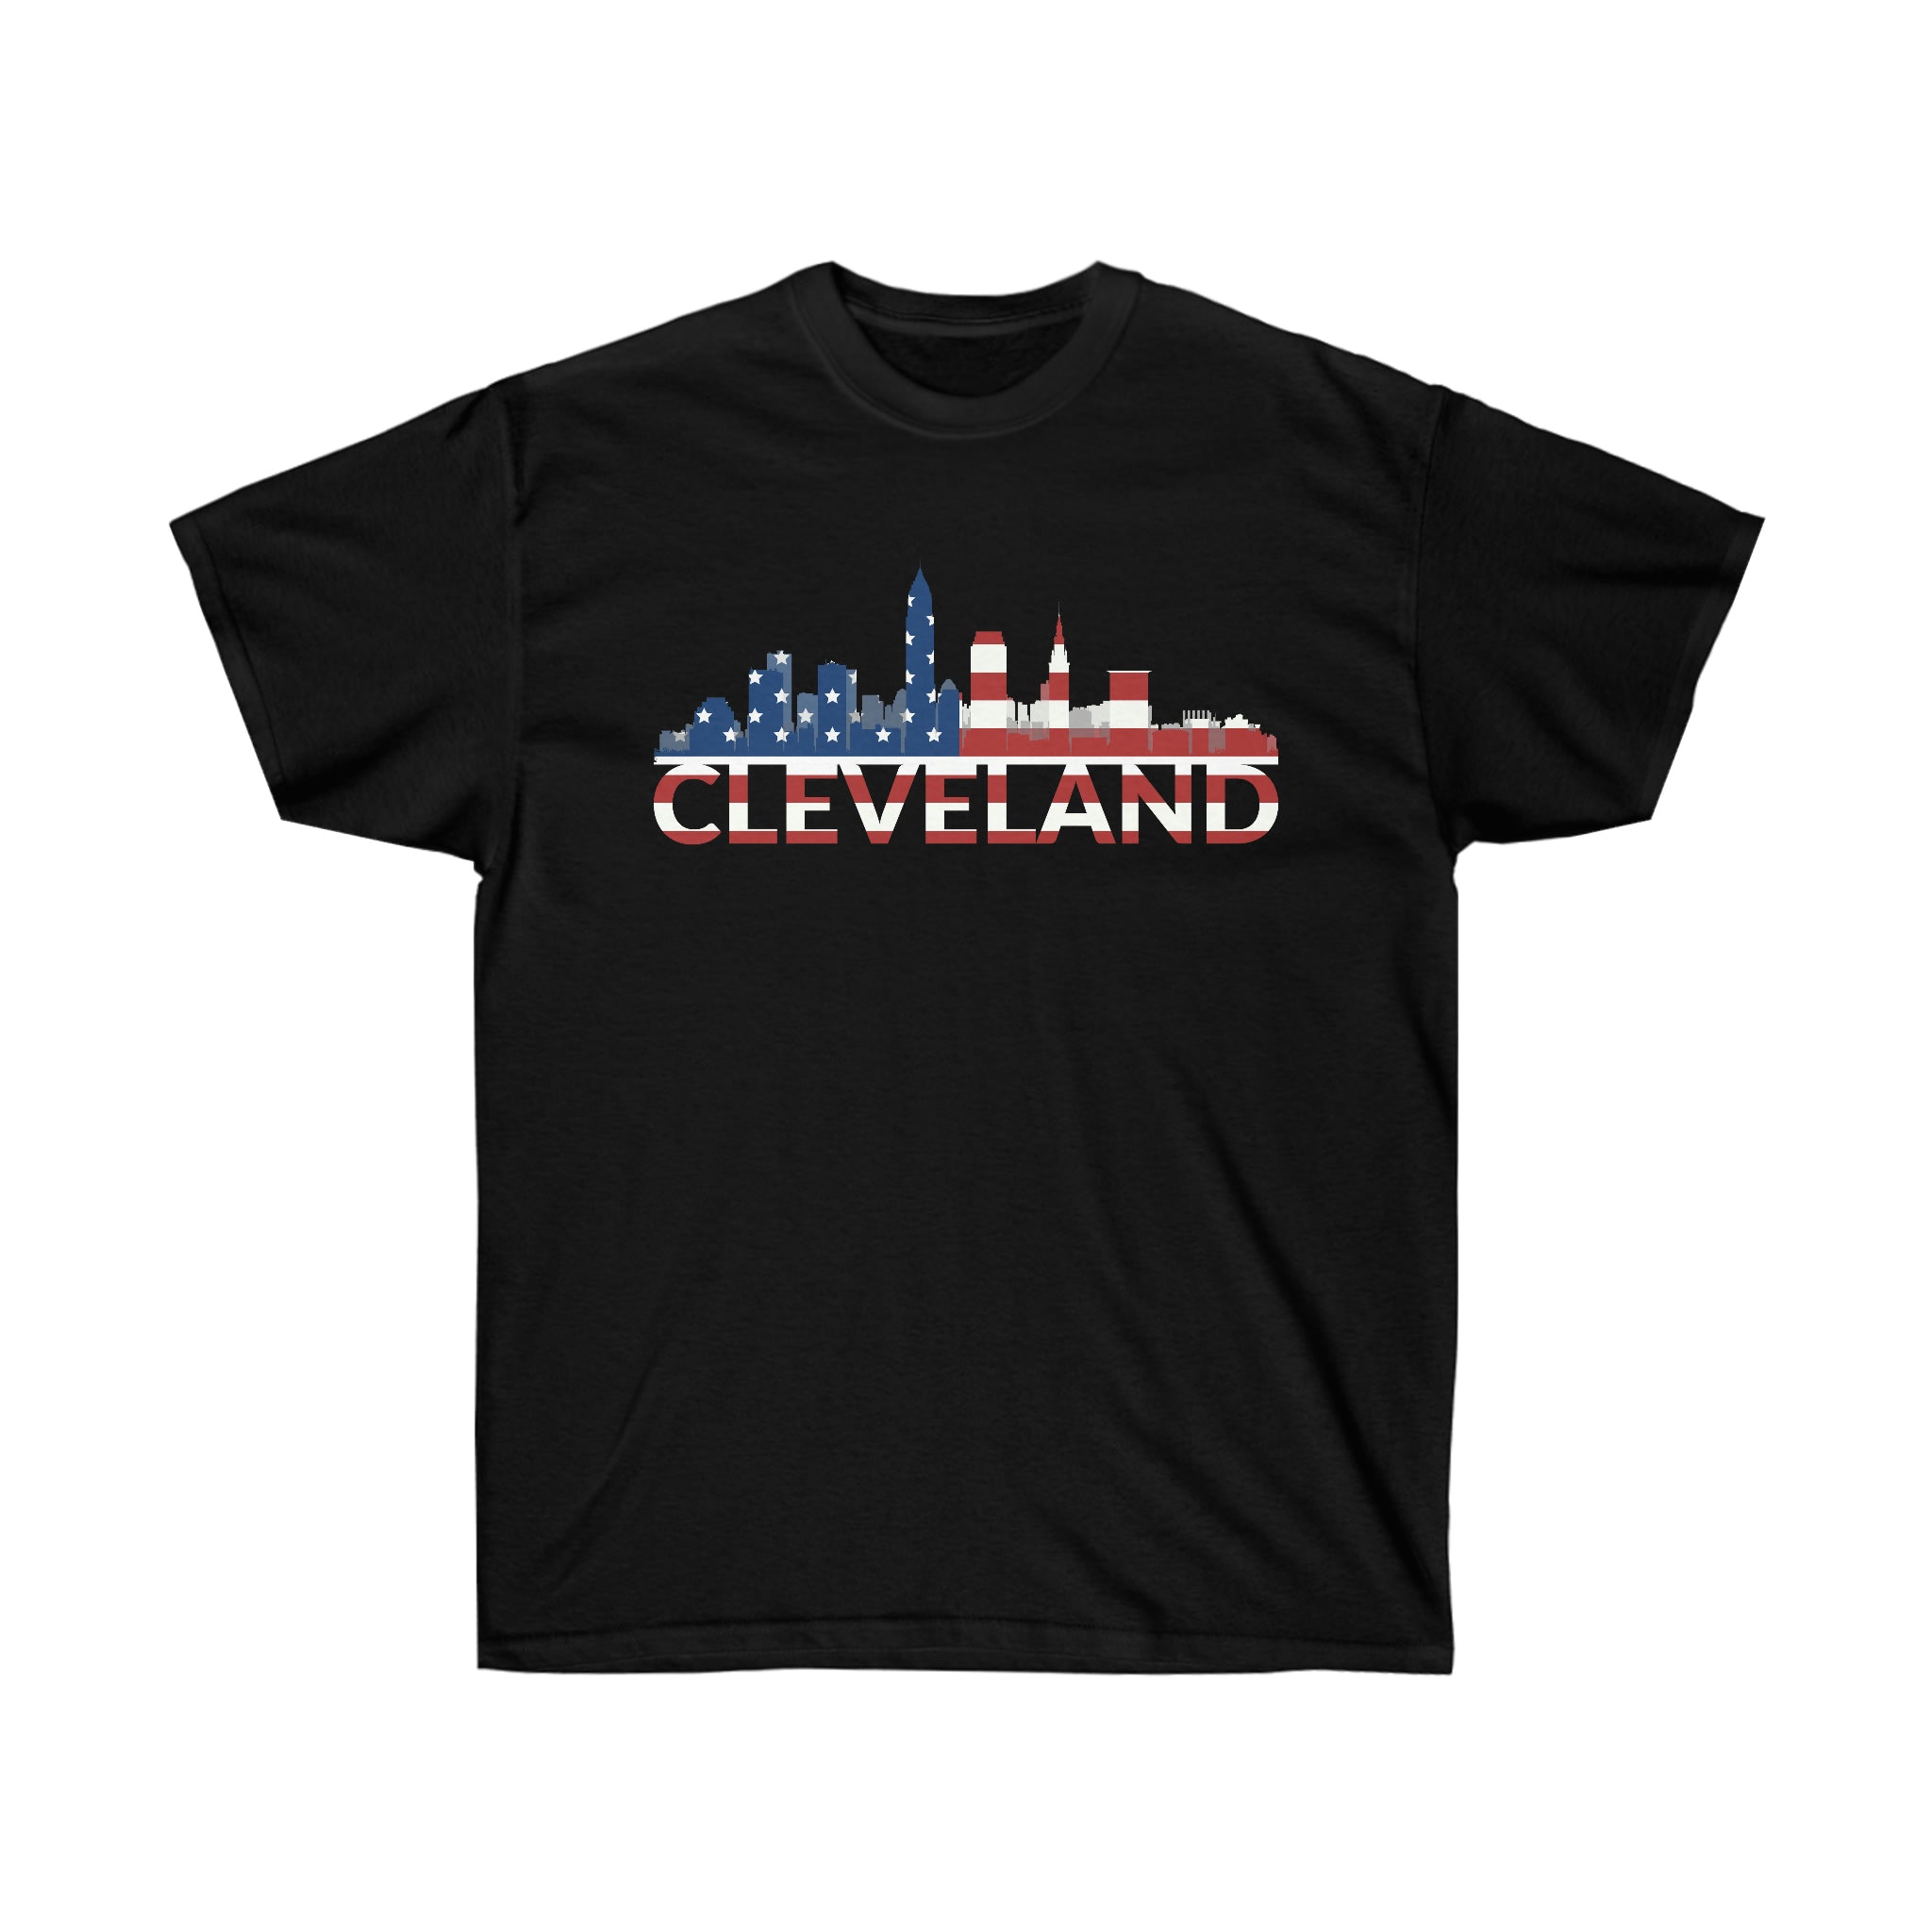 Unisex Ultra Cotton Tee "Higher Quality Materials"(CLEVELAND)